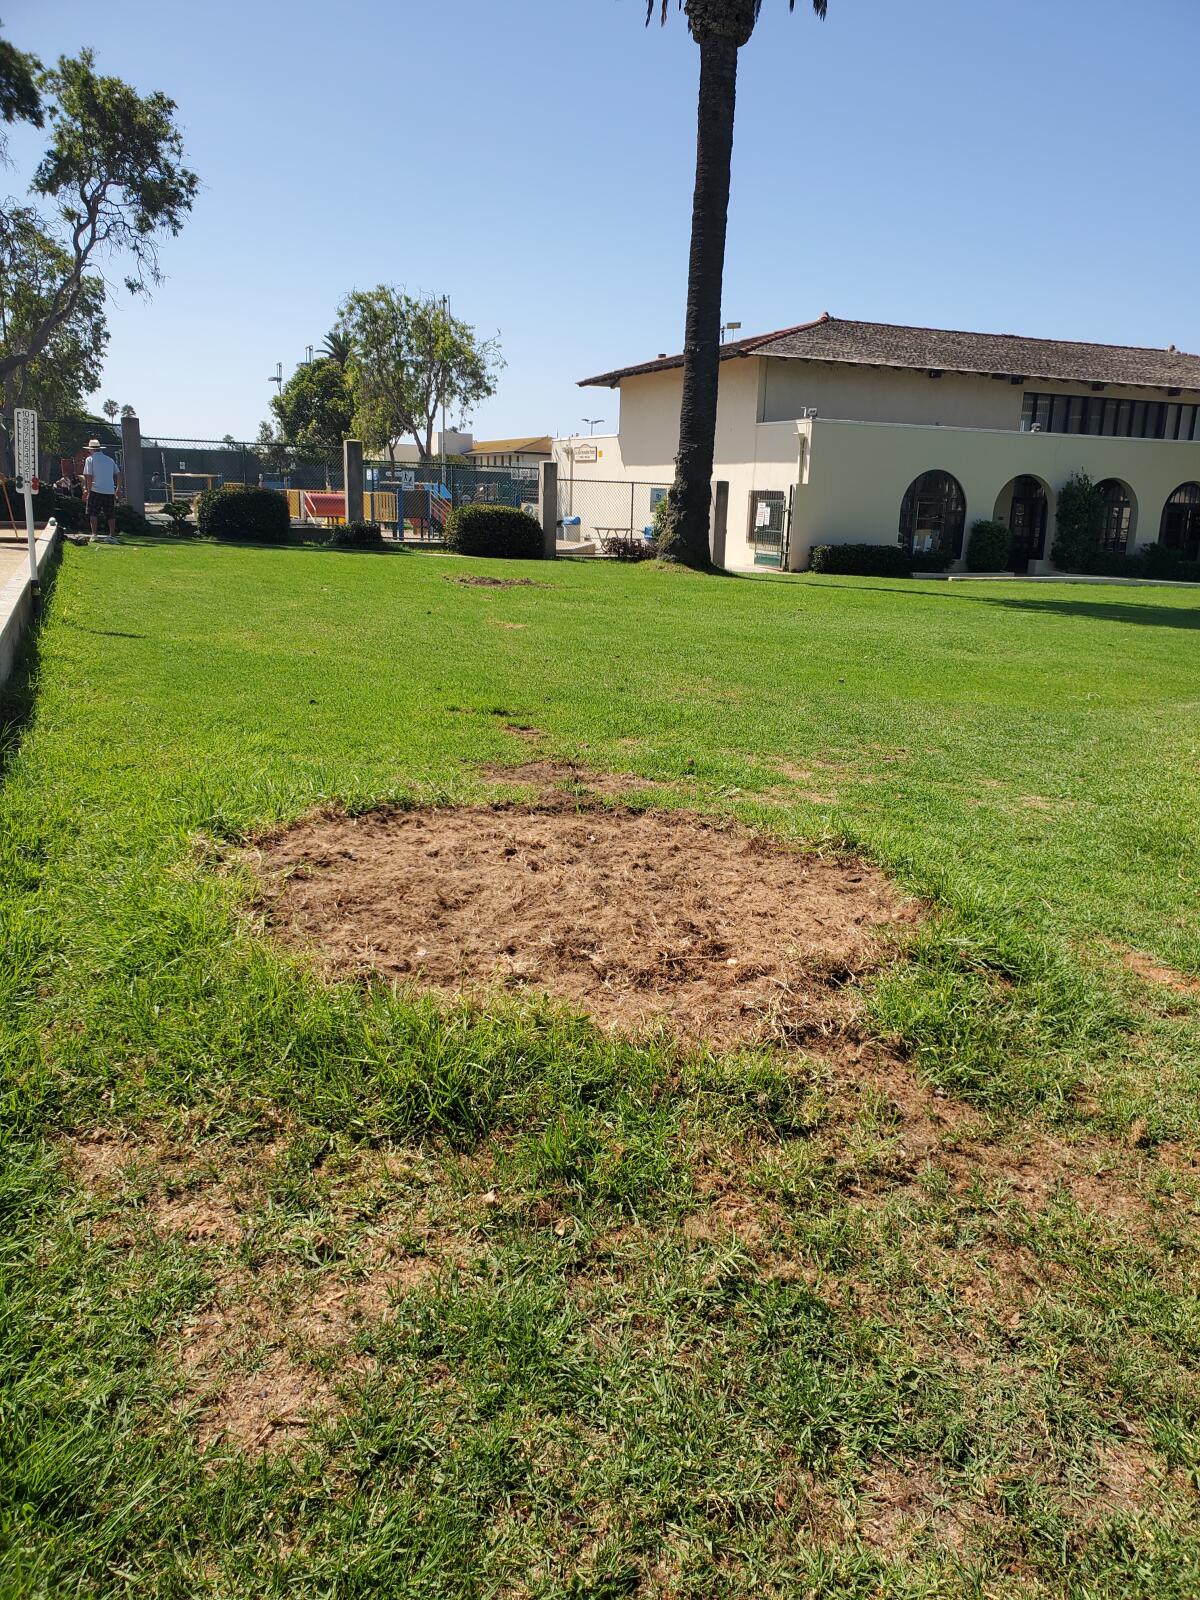 A palm tree was recently removed from this location on the La Jolla Recreation Center grounds following a weevil infestation.